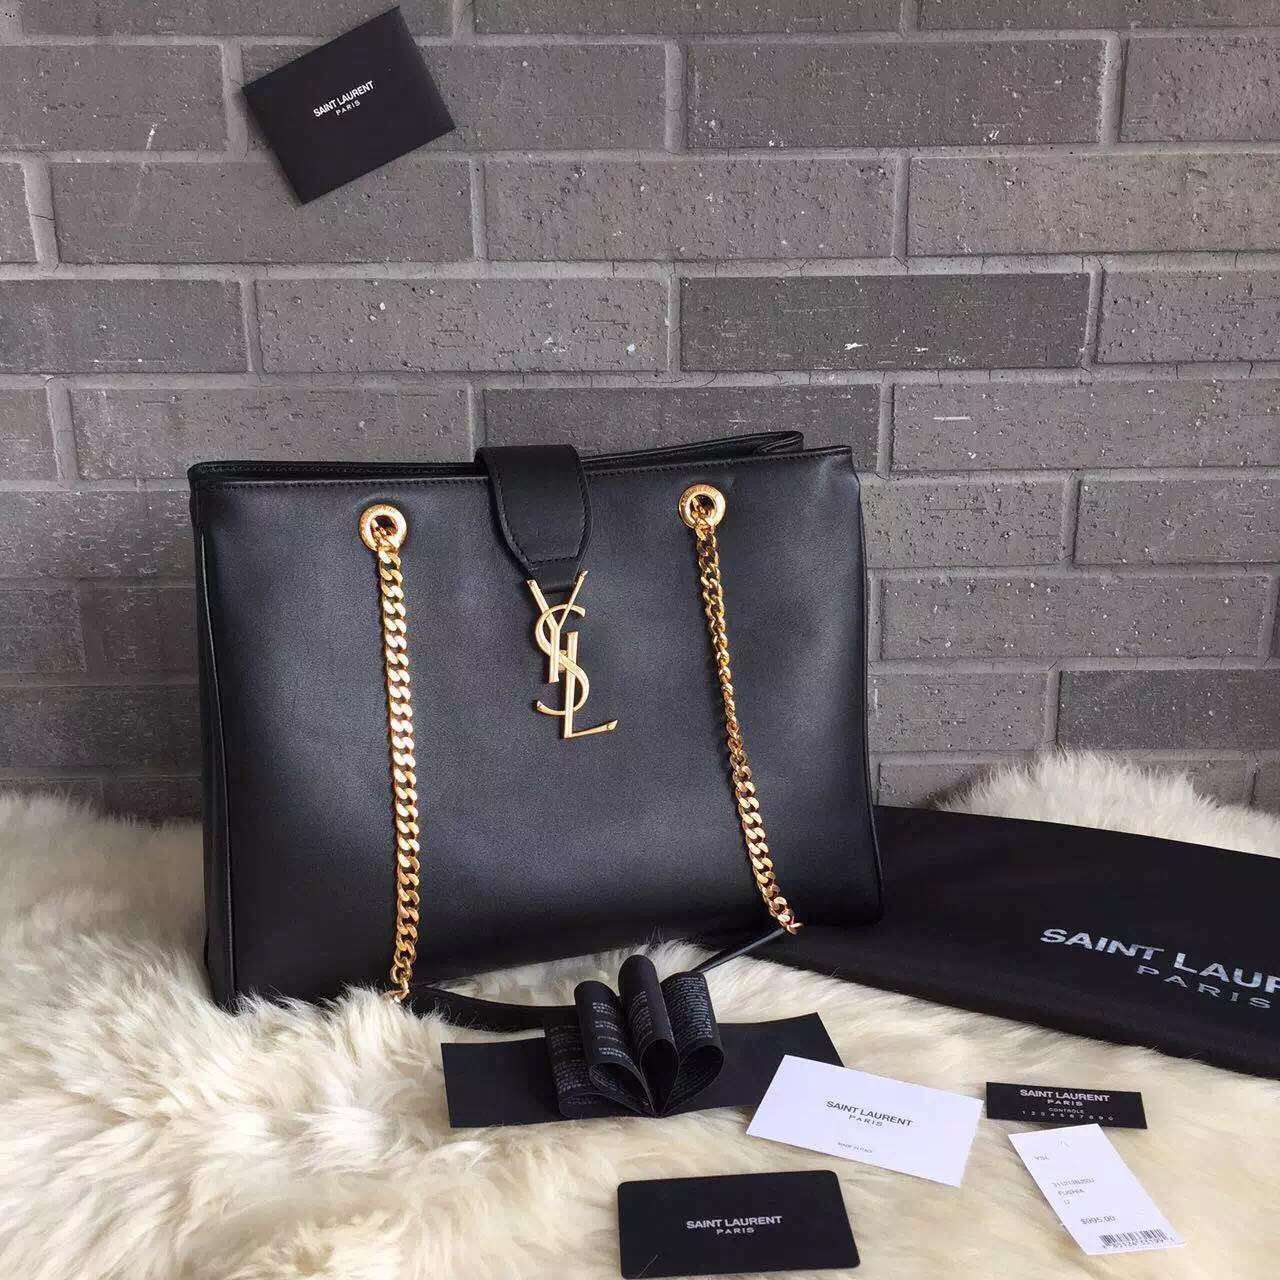 2015 New Saint Laurent Bag Cheap Sale-Saint Laurent Classic Monogram Shopping Bag in Black Smooth Calfskin Leather with Gold Chain